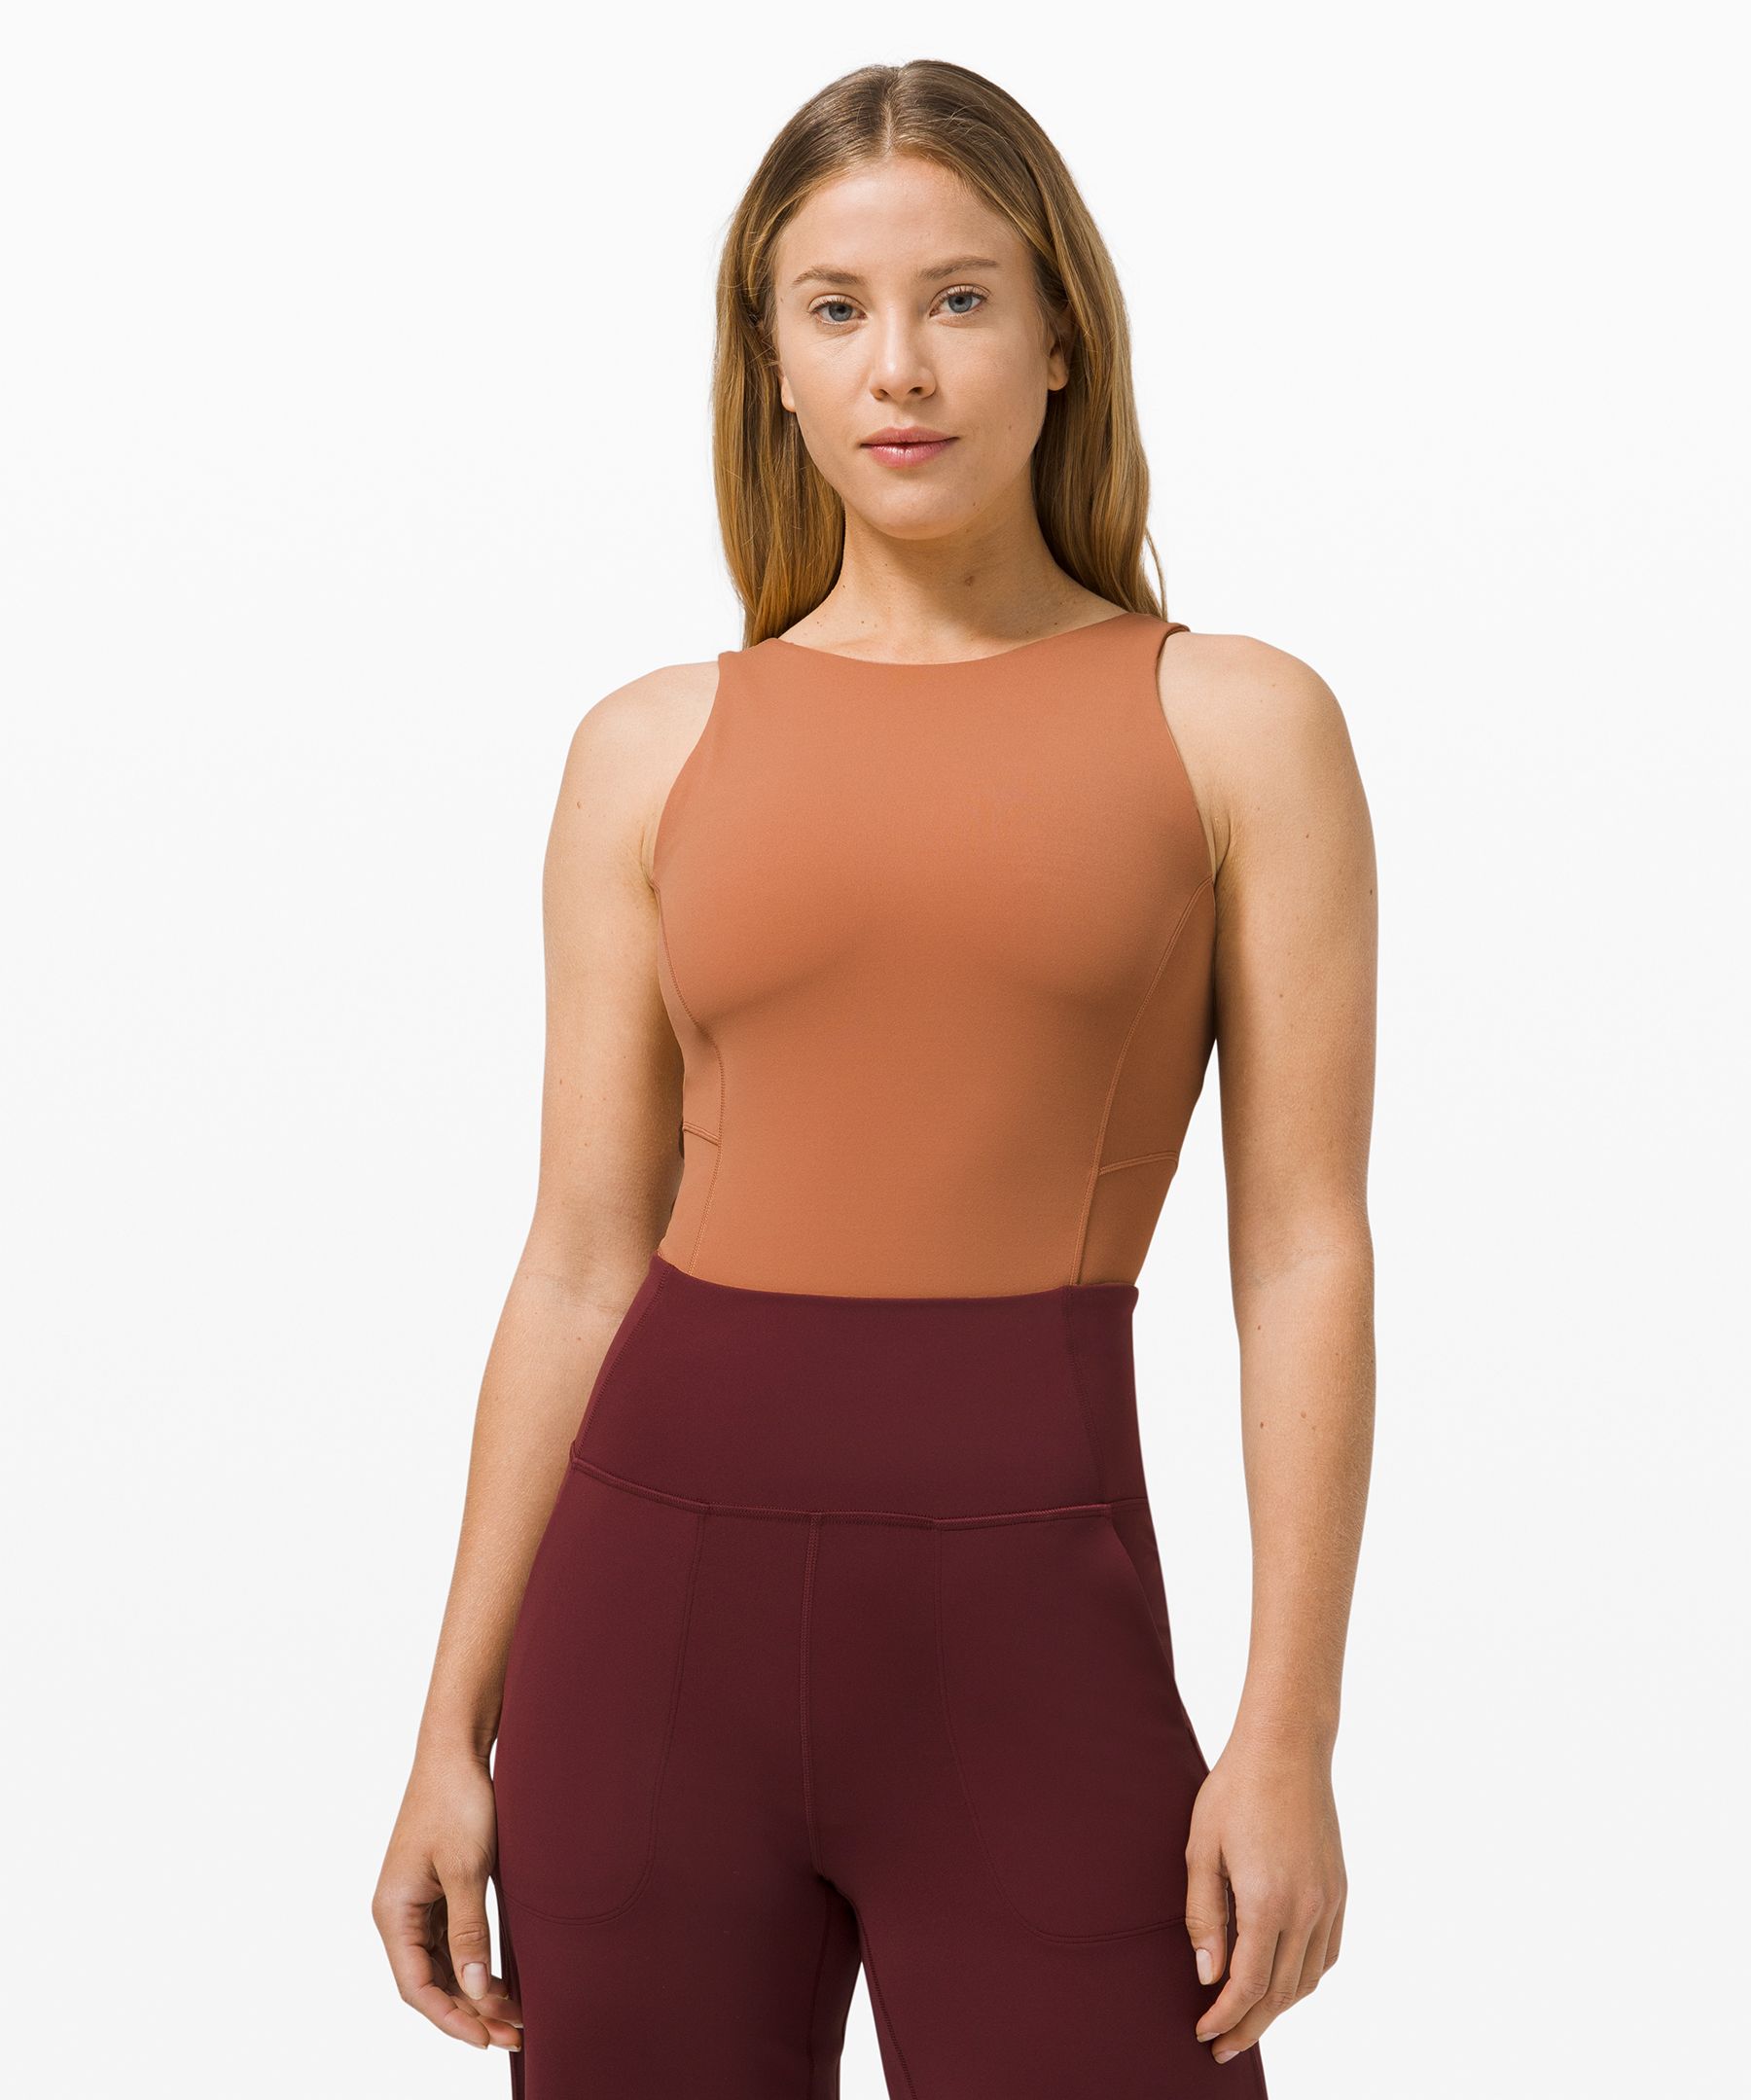 MY THOUGHTS ON THE LULULEMON ALIGN BODYSUIT